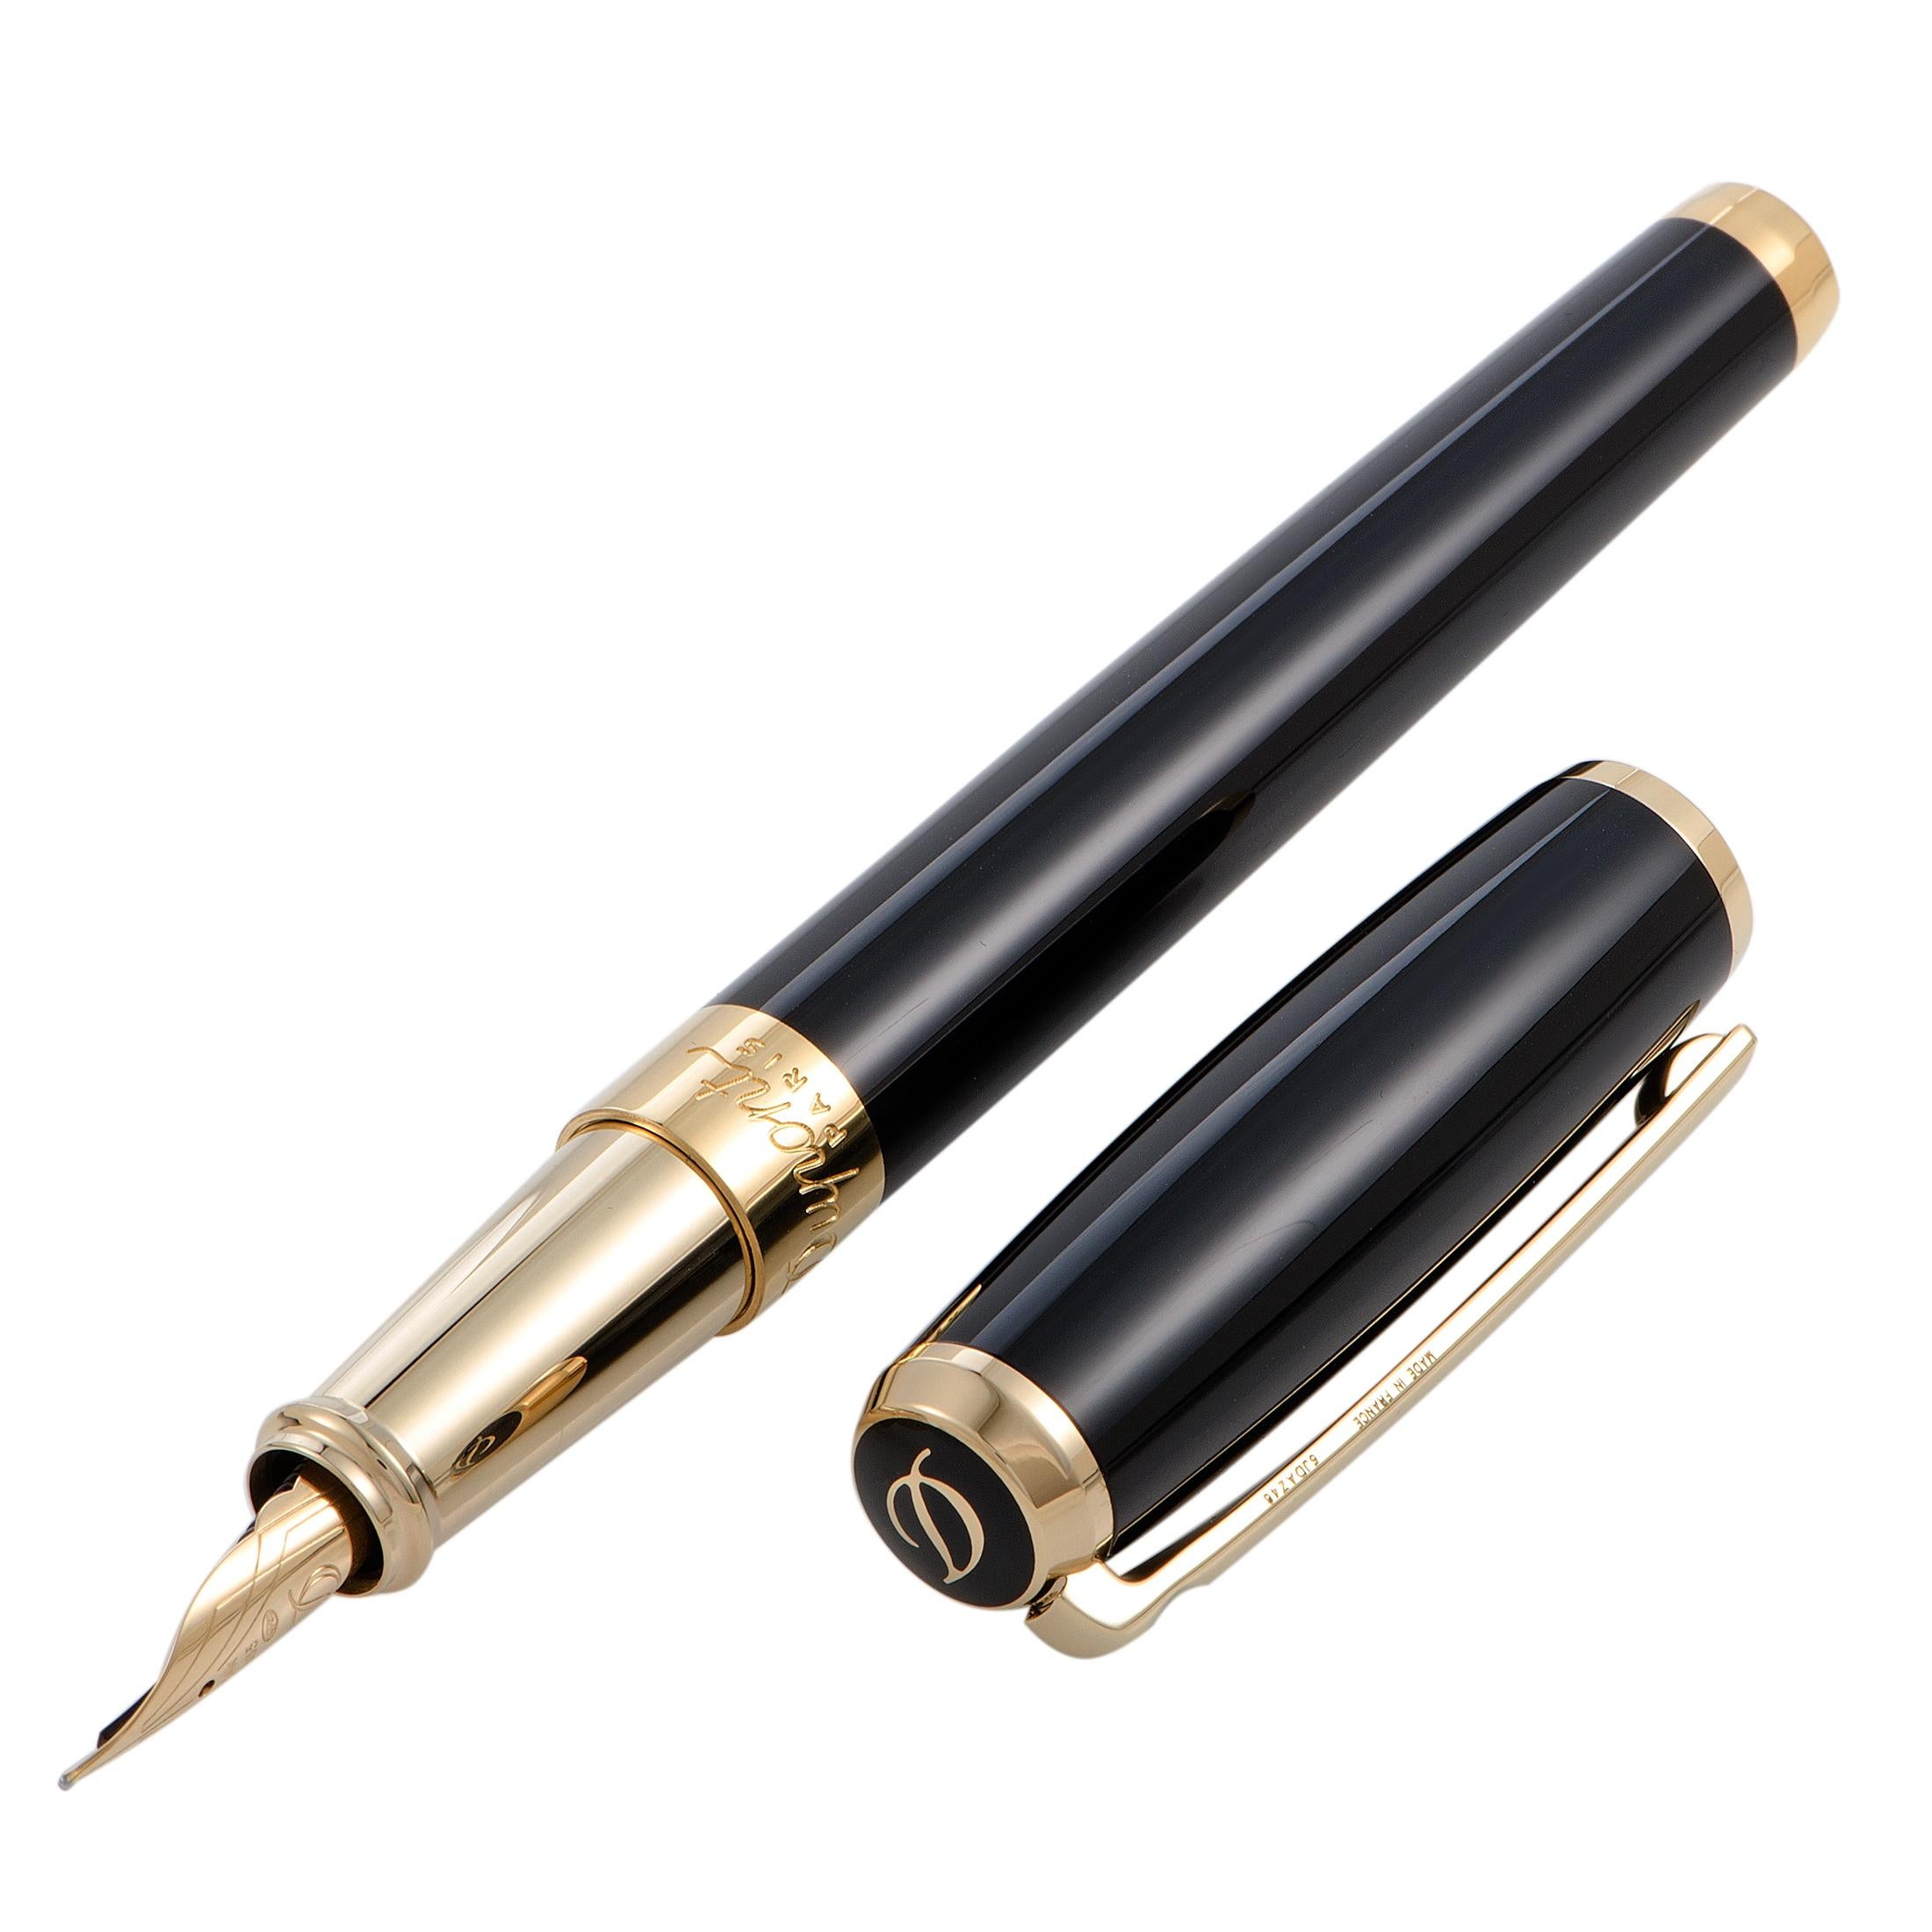 The compelling black lacquer and the ever-luxurious golden radiance give an exceptionally elegant appeal to this fascinating fountain pen that boasts a most splendidly classic design. The pen is presented by S.T. Dupont within the refined “Line D”